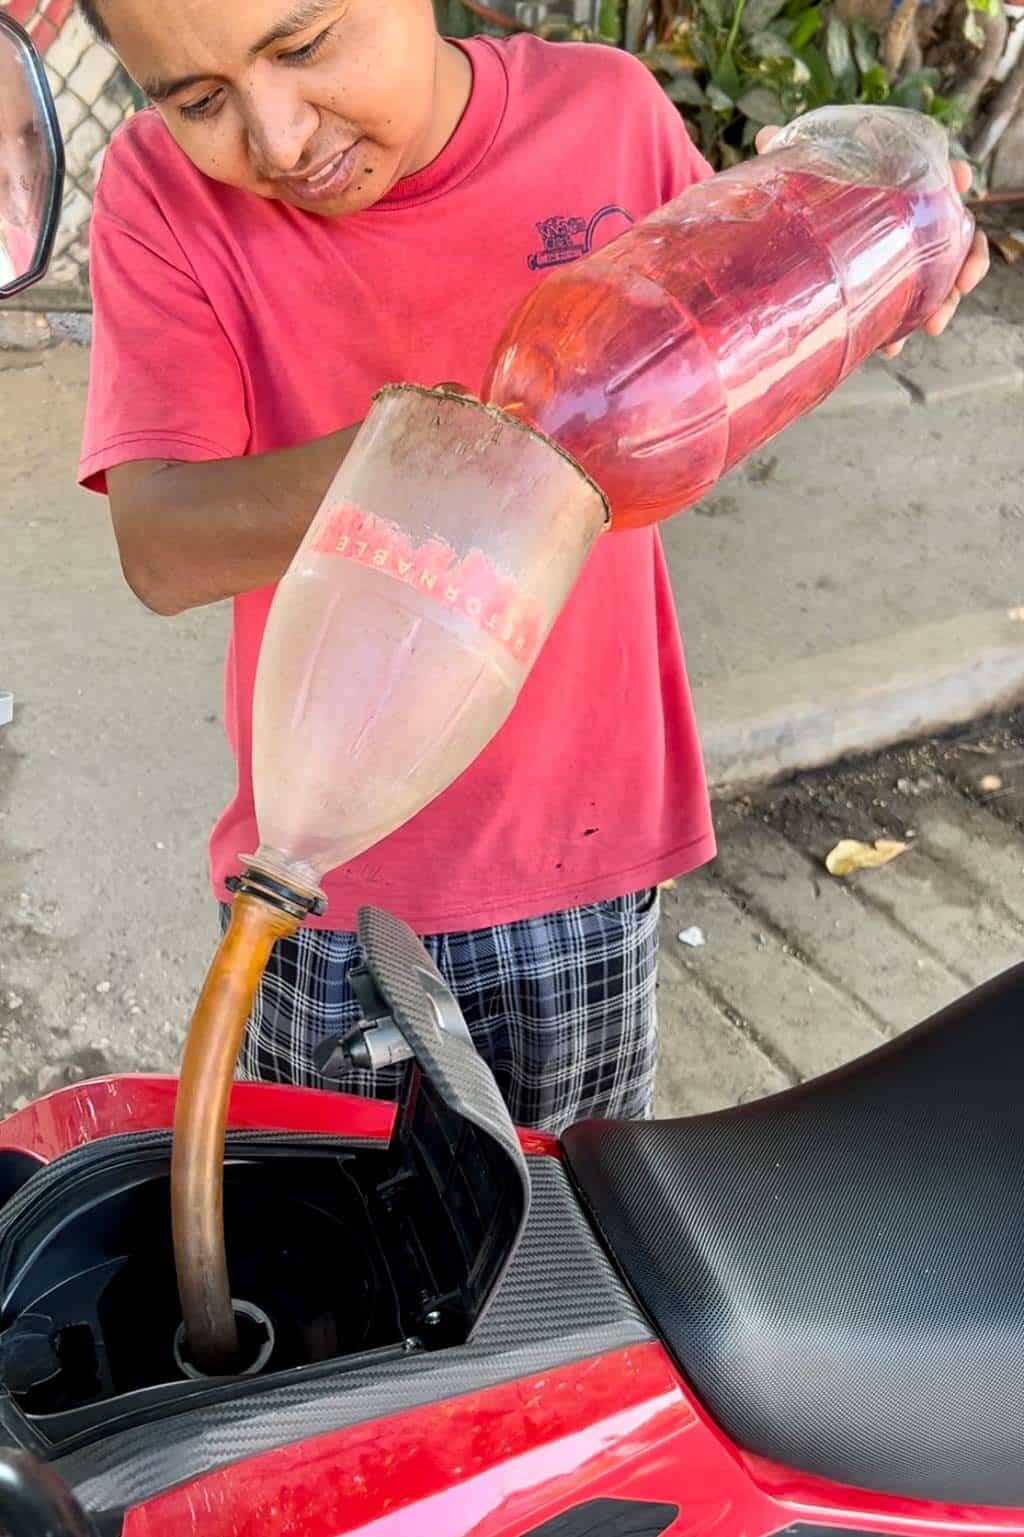 Siphoning gas into a scooter